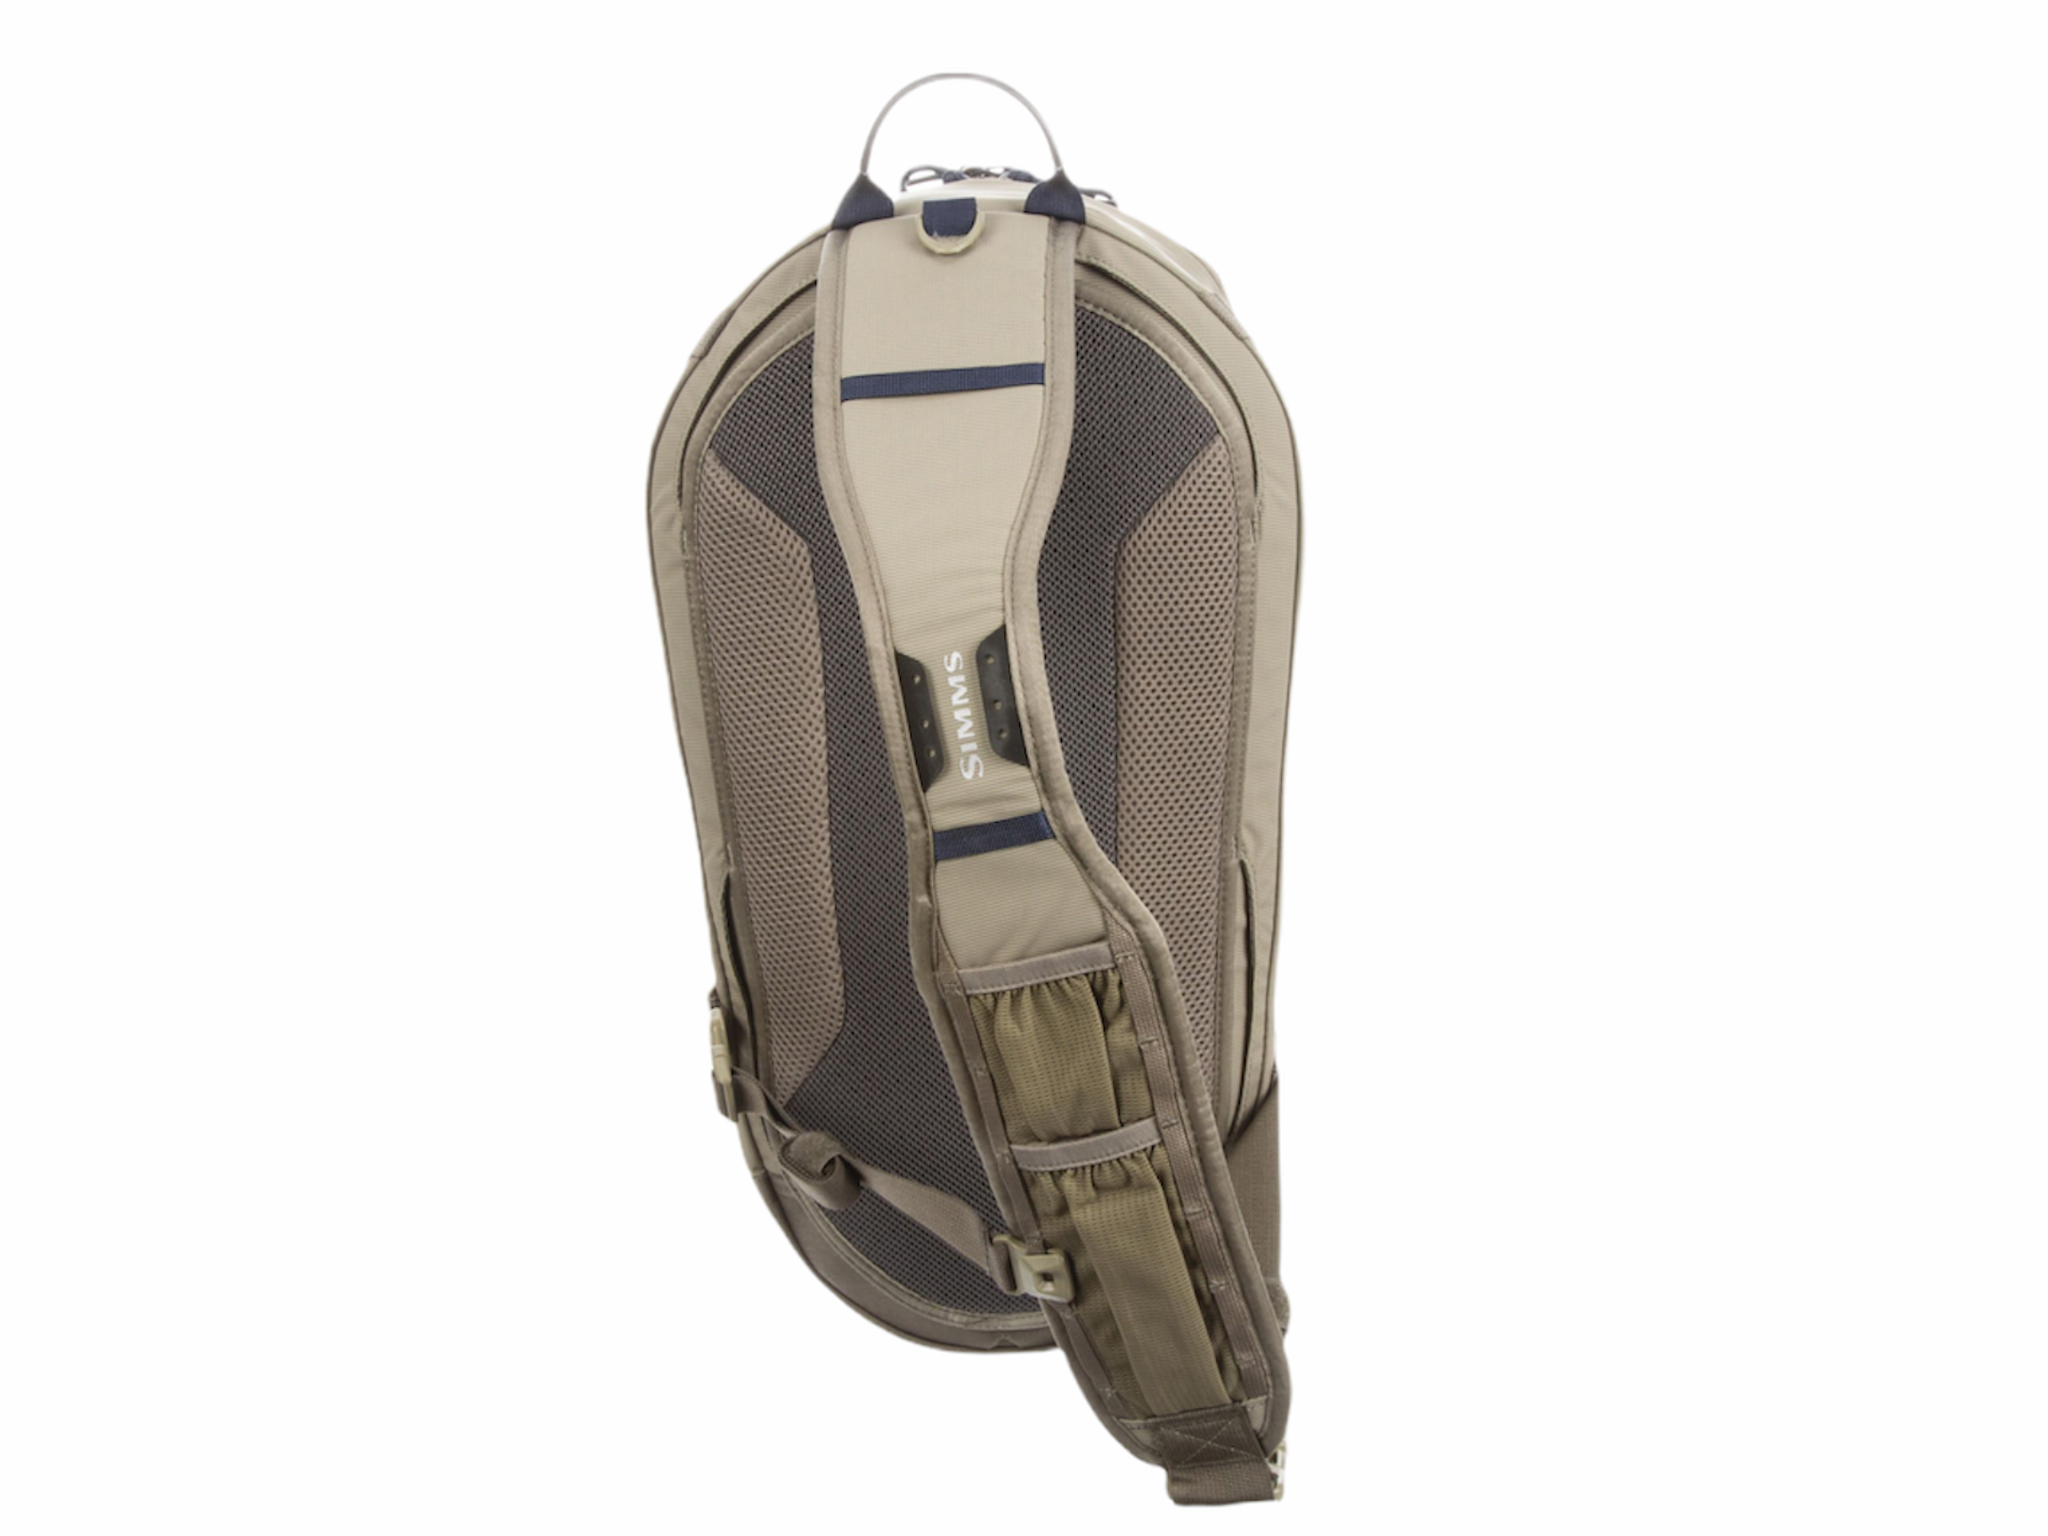 Simms Freestone Right Shoulder Tactical Fishing Sling Pack， Water